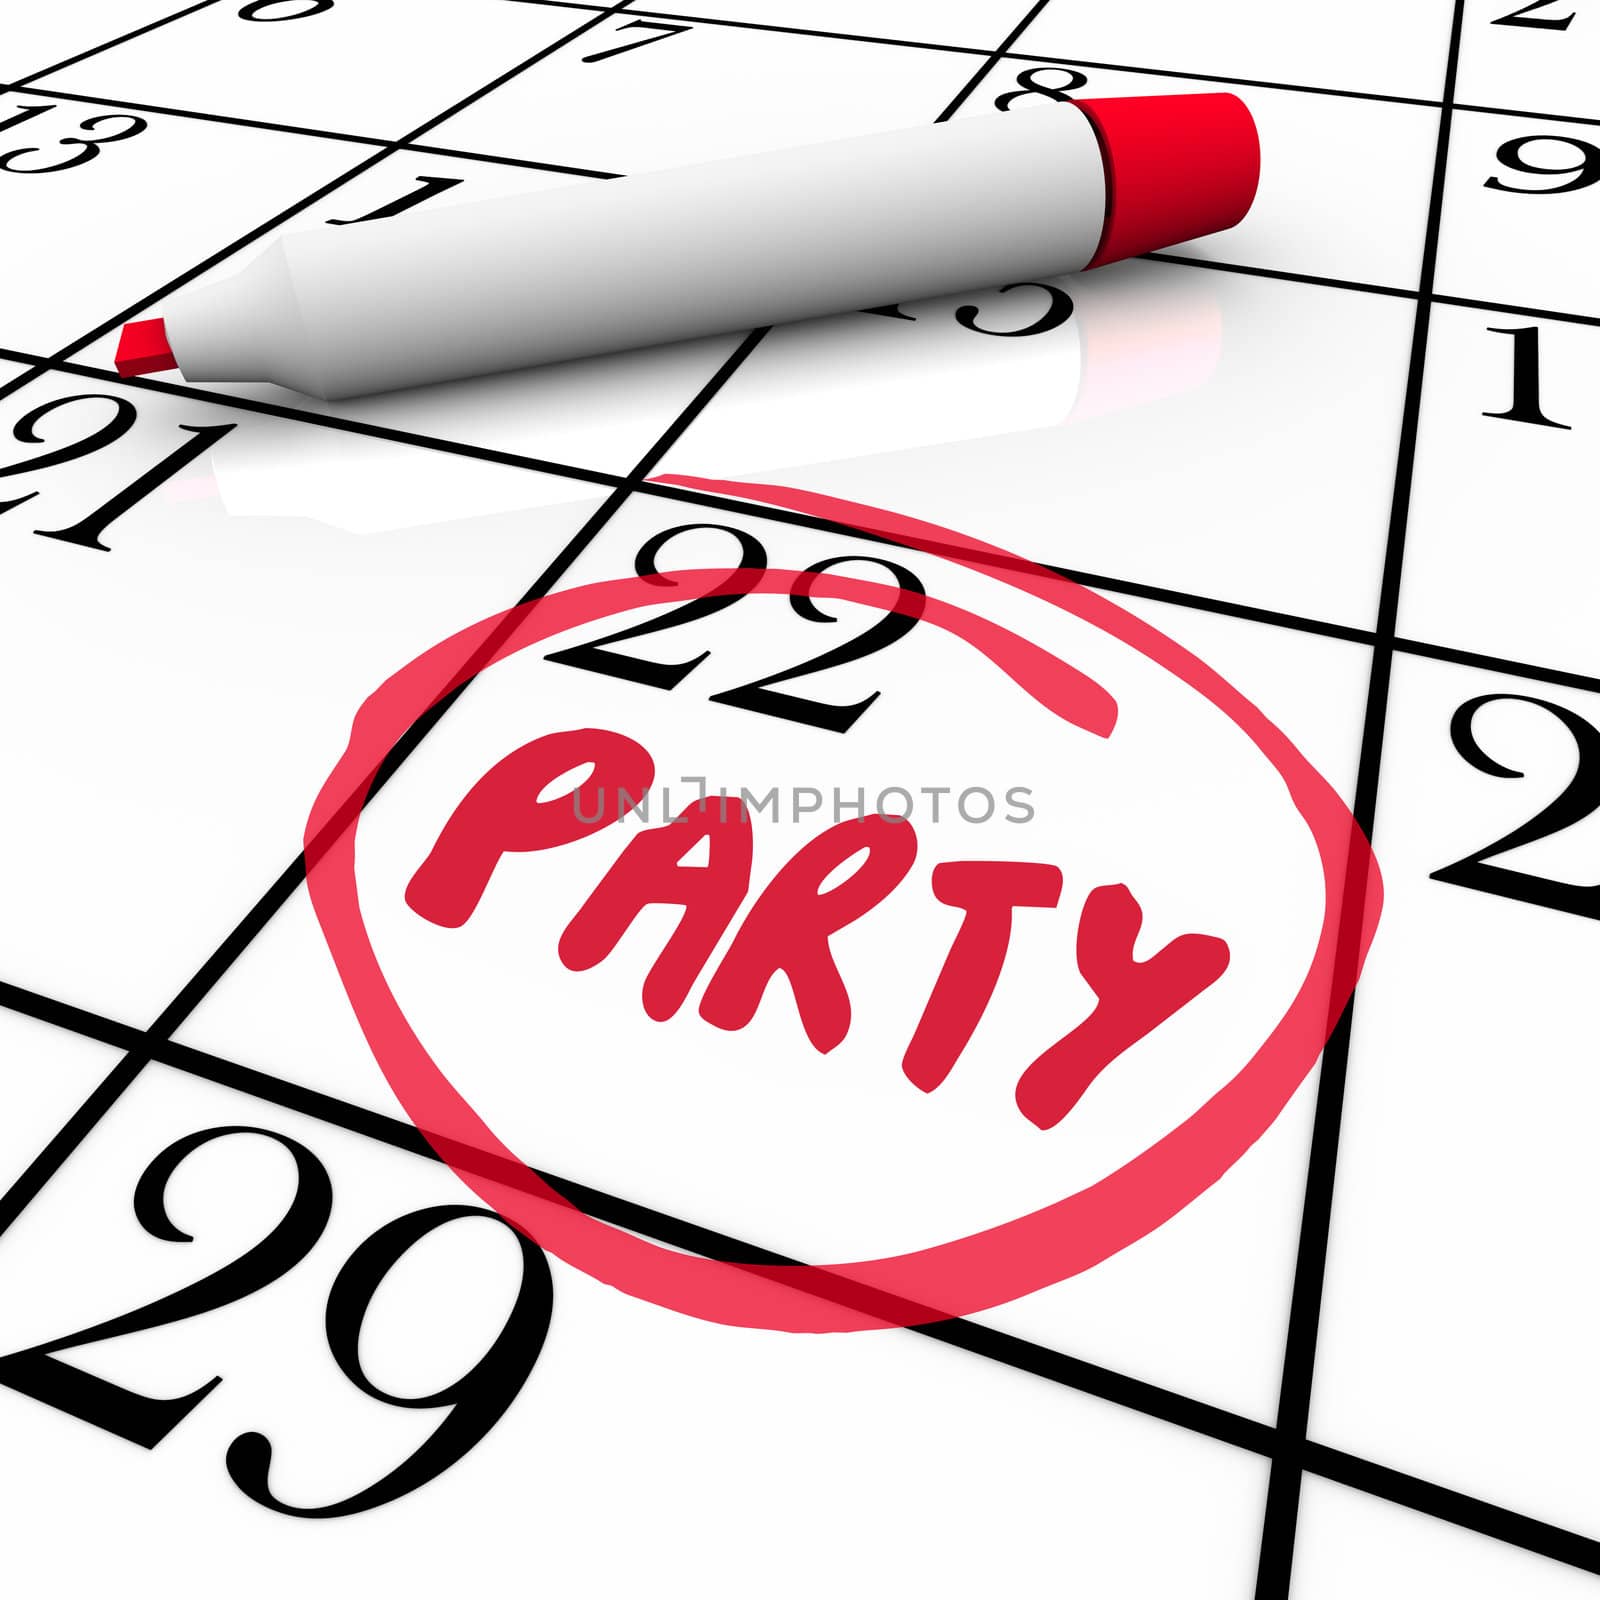 The word Party written on a calendar and circled to remind you of the day and date of a special celebration or event